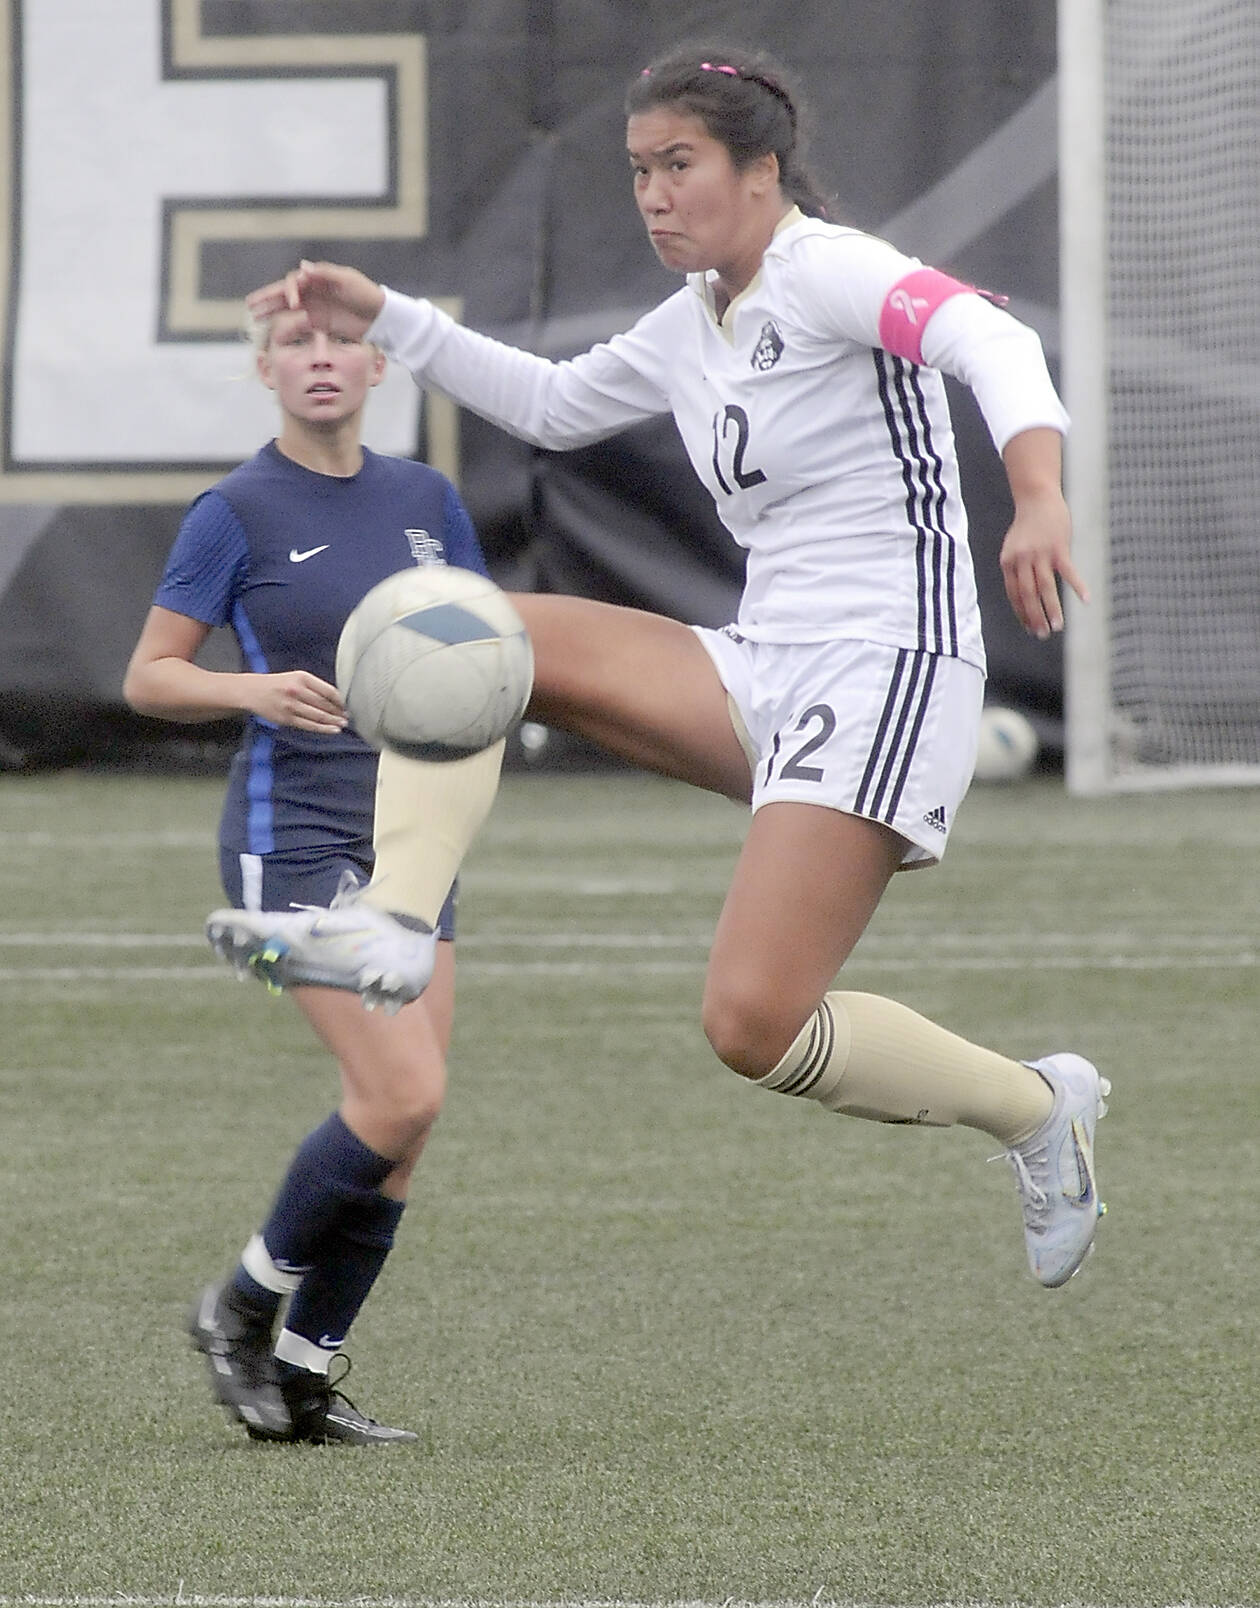 KEITH THORPE/PENINSULA DAILY NEWS
Peninsula's Keilee Silva steps high for the ball as Bellevue's Daisy Morris look on during Wednesday's match in Port Angeles.